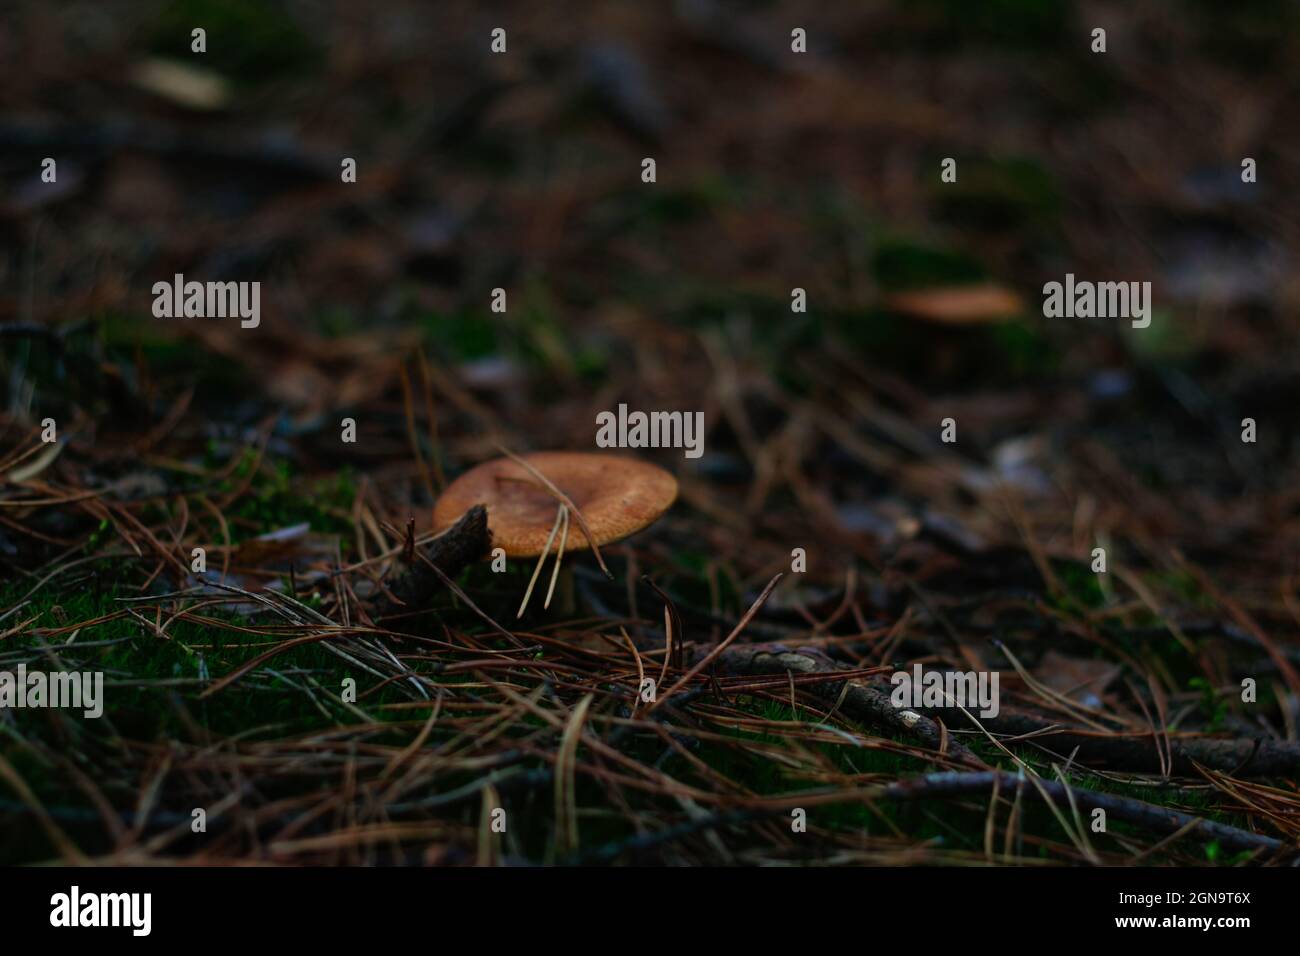 Defocus russula poisonous mushroom, milkcap, among dry grass, leaves and needles. Fungus mushroom growing in the green forest on moss. Boletus hiding Stock Photo